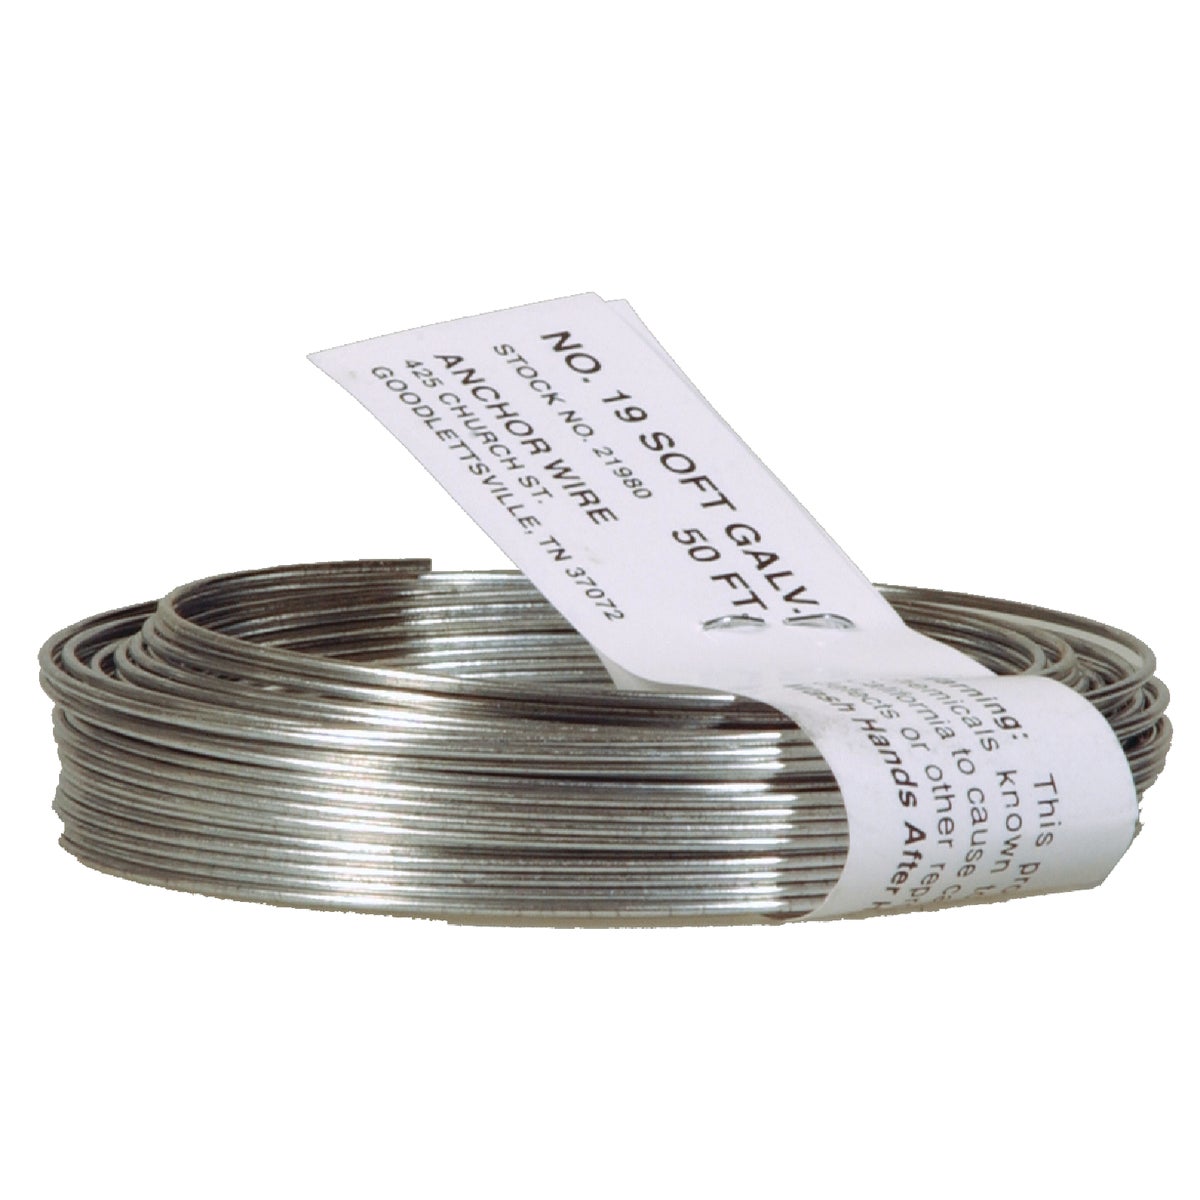 Hillman Anchor Wire 50 Ft. 19 Ga. Dark Annealed Steel Mechanics and Stovepipe General Purpose Wire, Coil